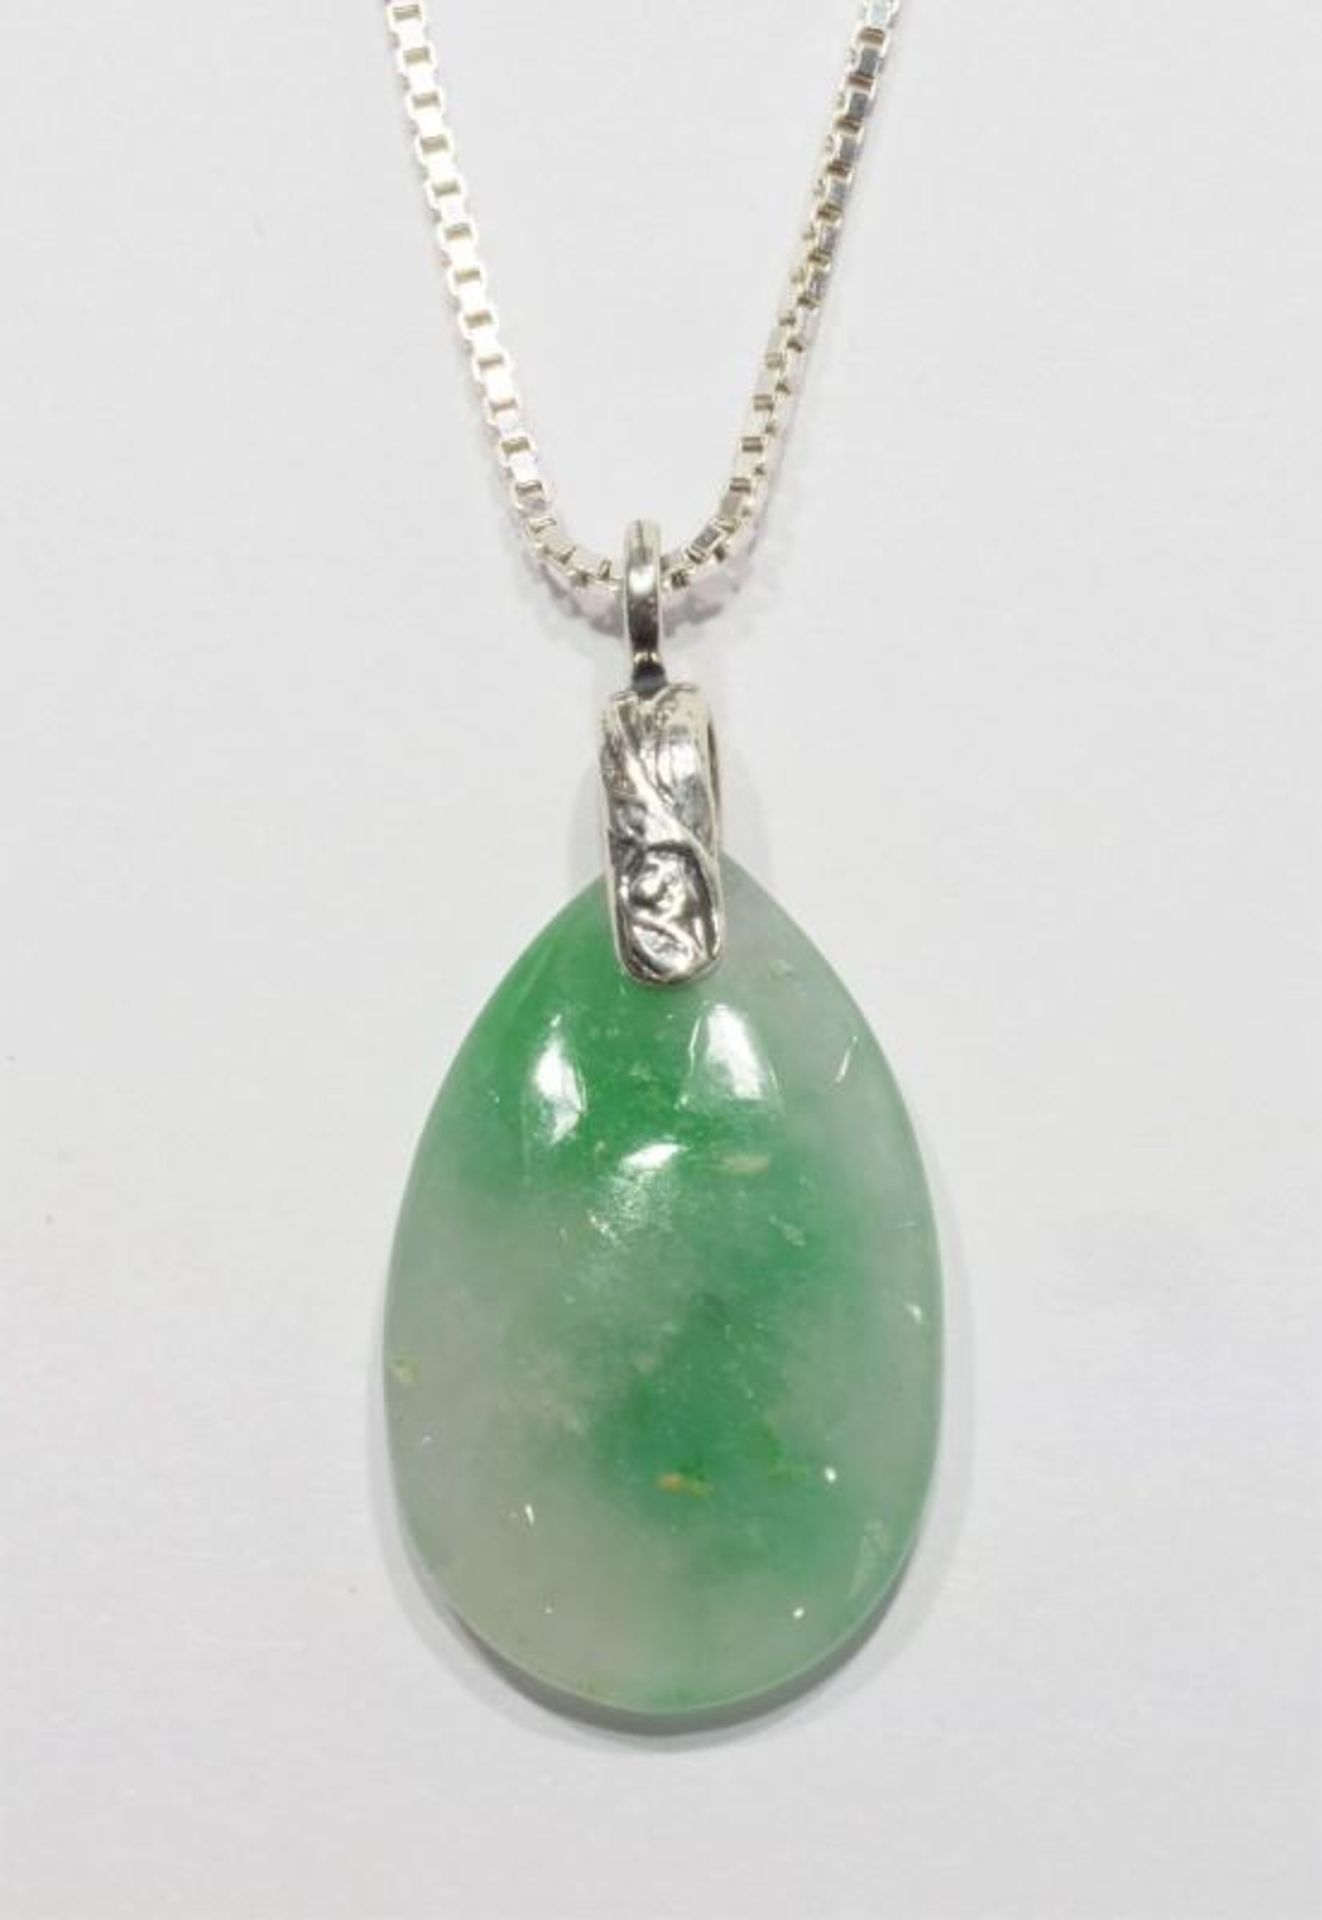 Genuine Jadeite (Approx 26.0ct) Pear Shaped Drop Necklace with Sterling Silver Chain. Retail $240